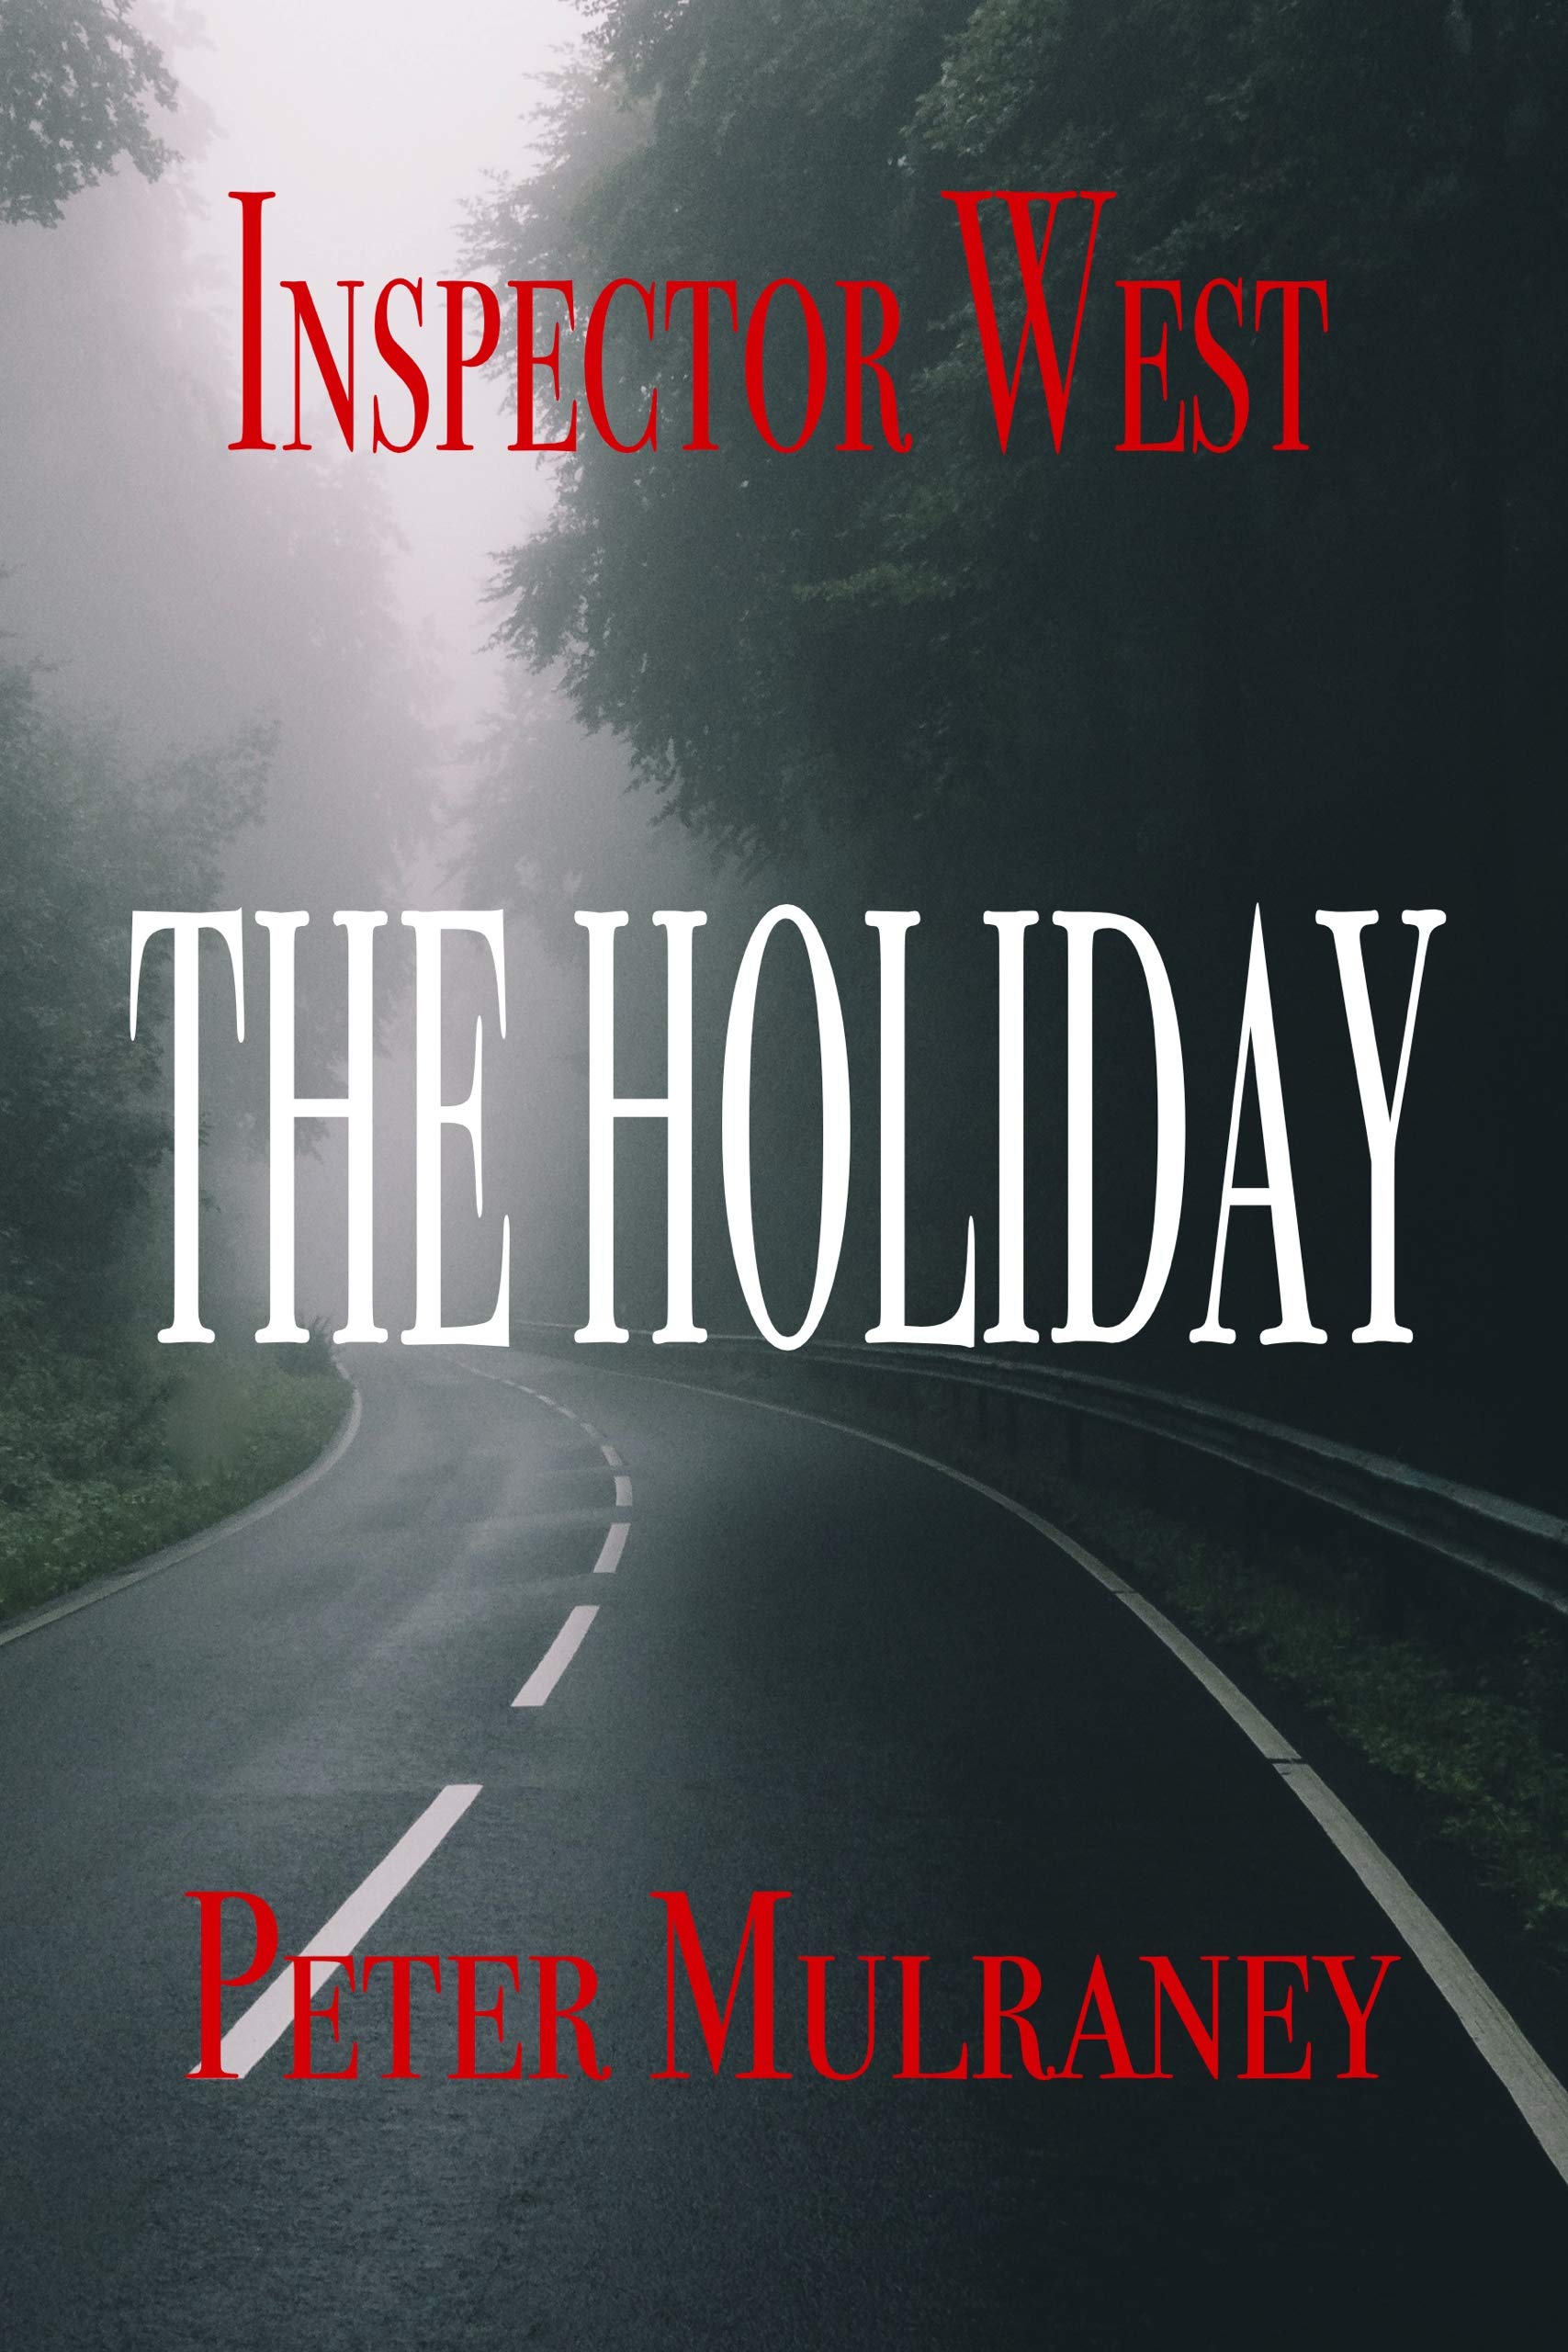 The Holiday (Inspector West Book 2)